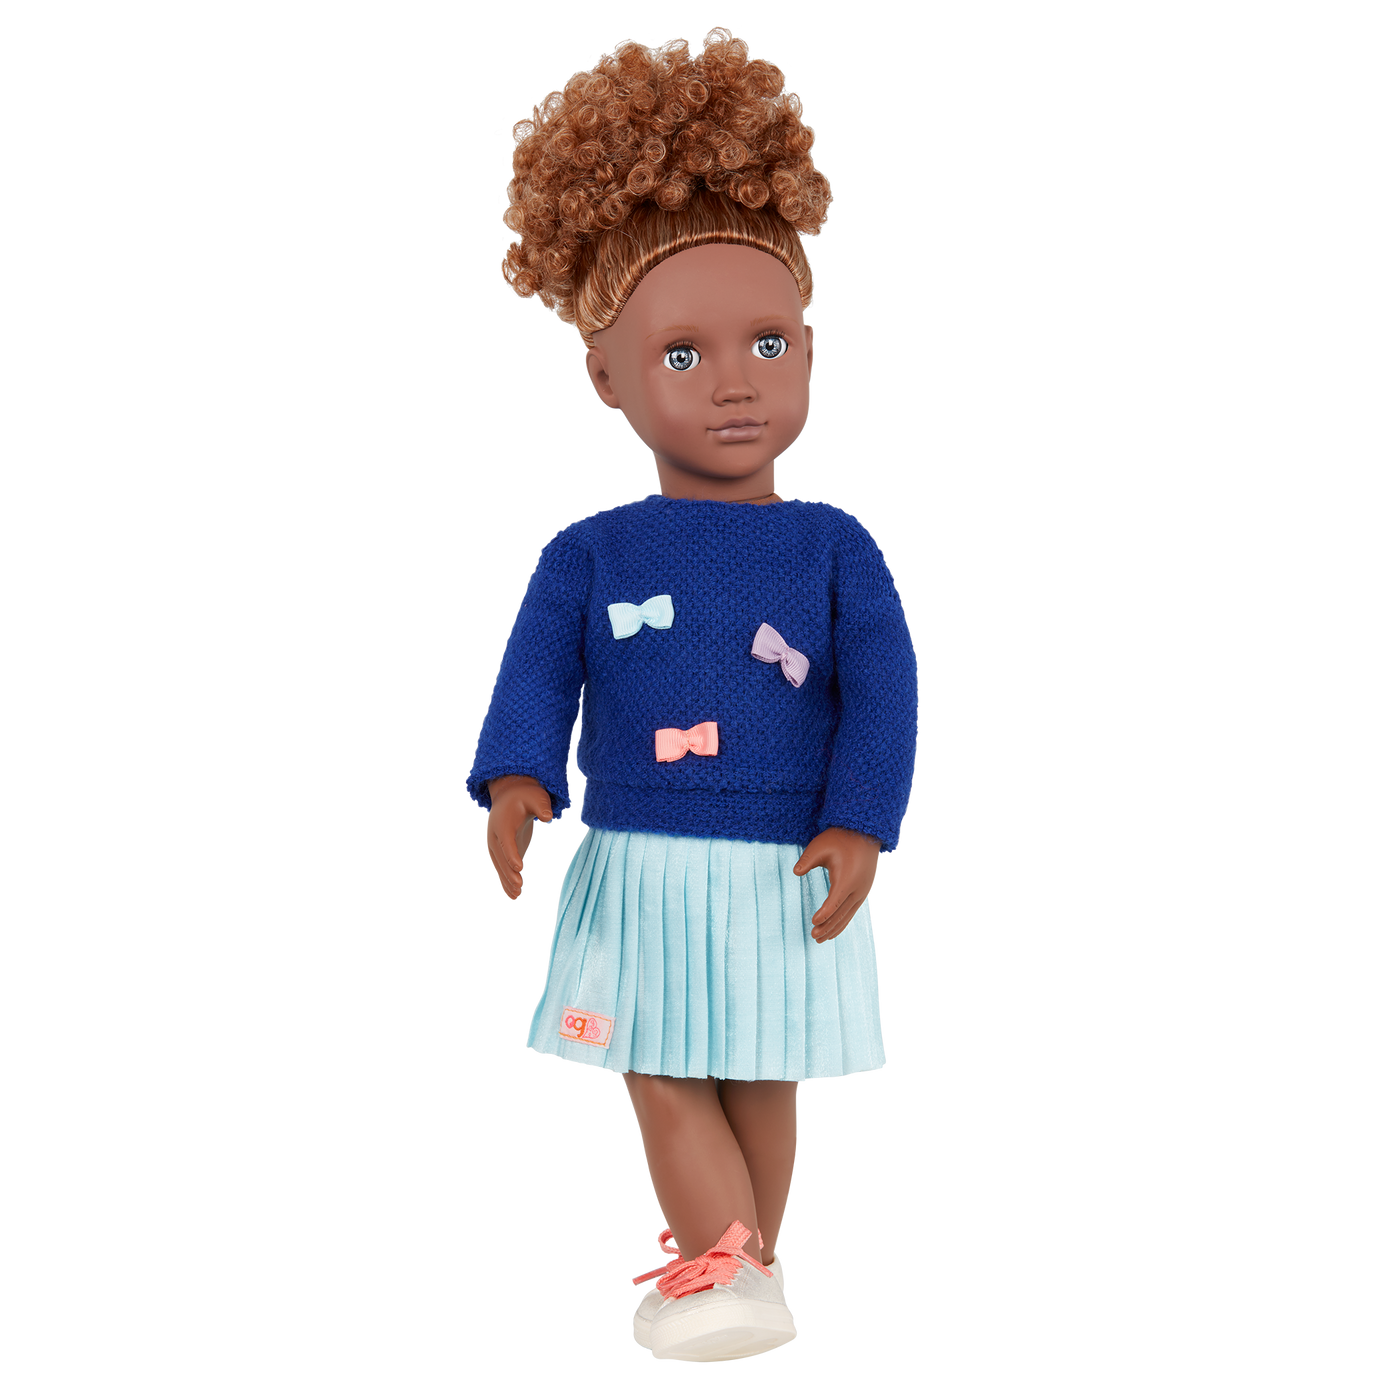 Our Generation Bright Bows Outfit for 18-inch Dolls